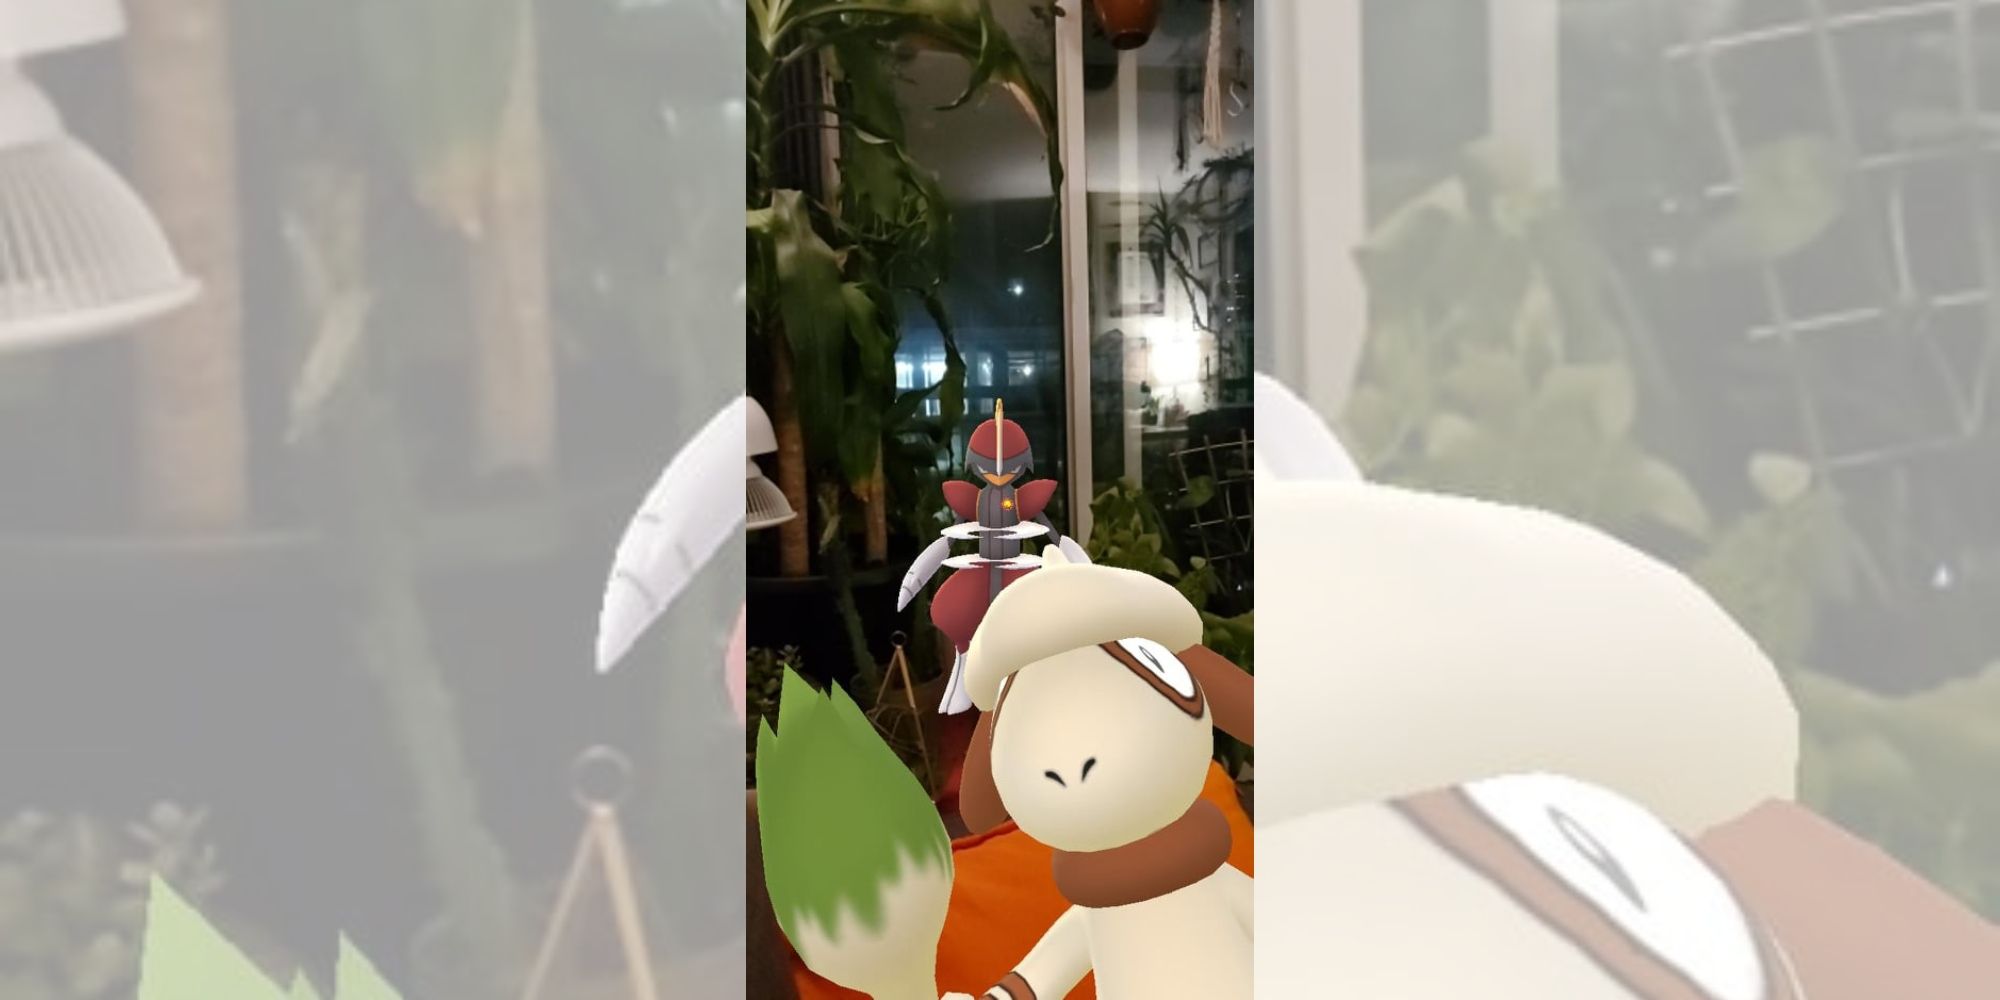 Smeargle Photobomb in a picture of a bisharp 